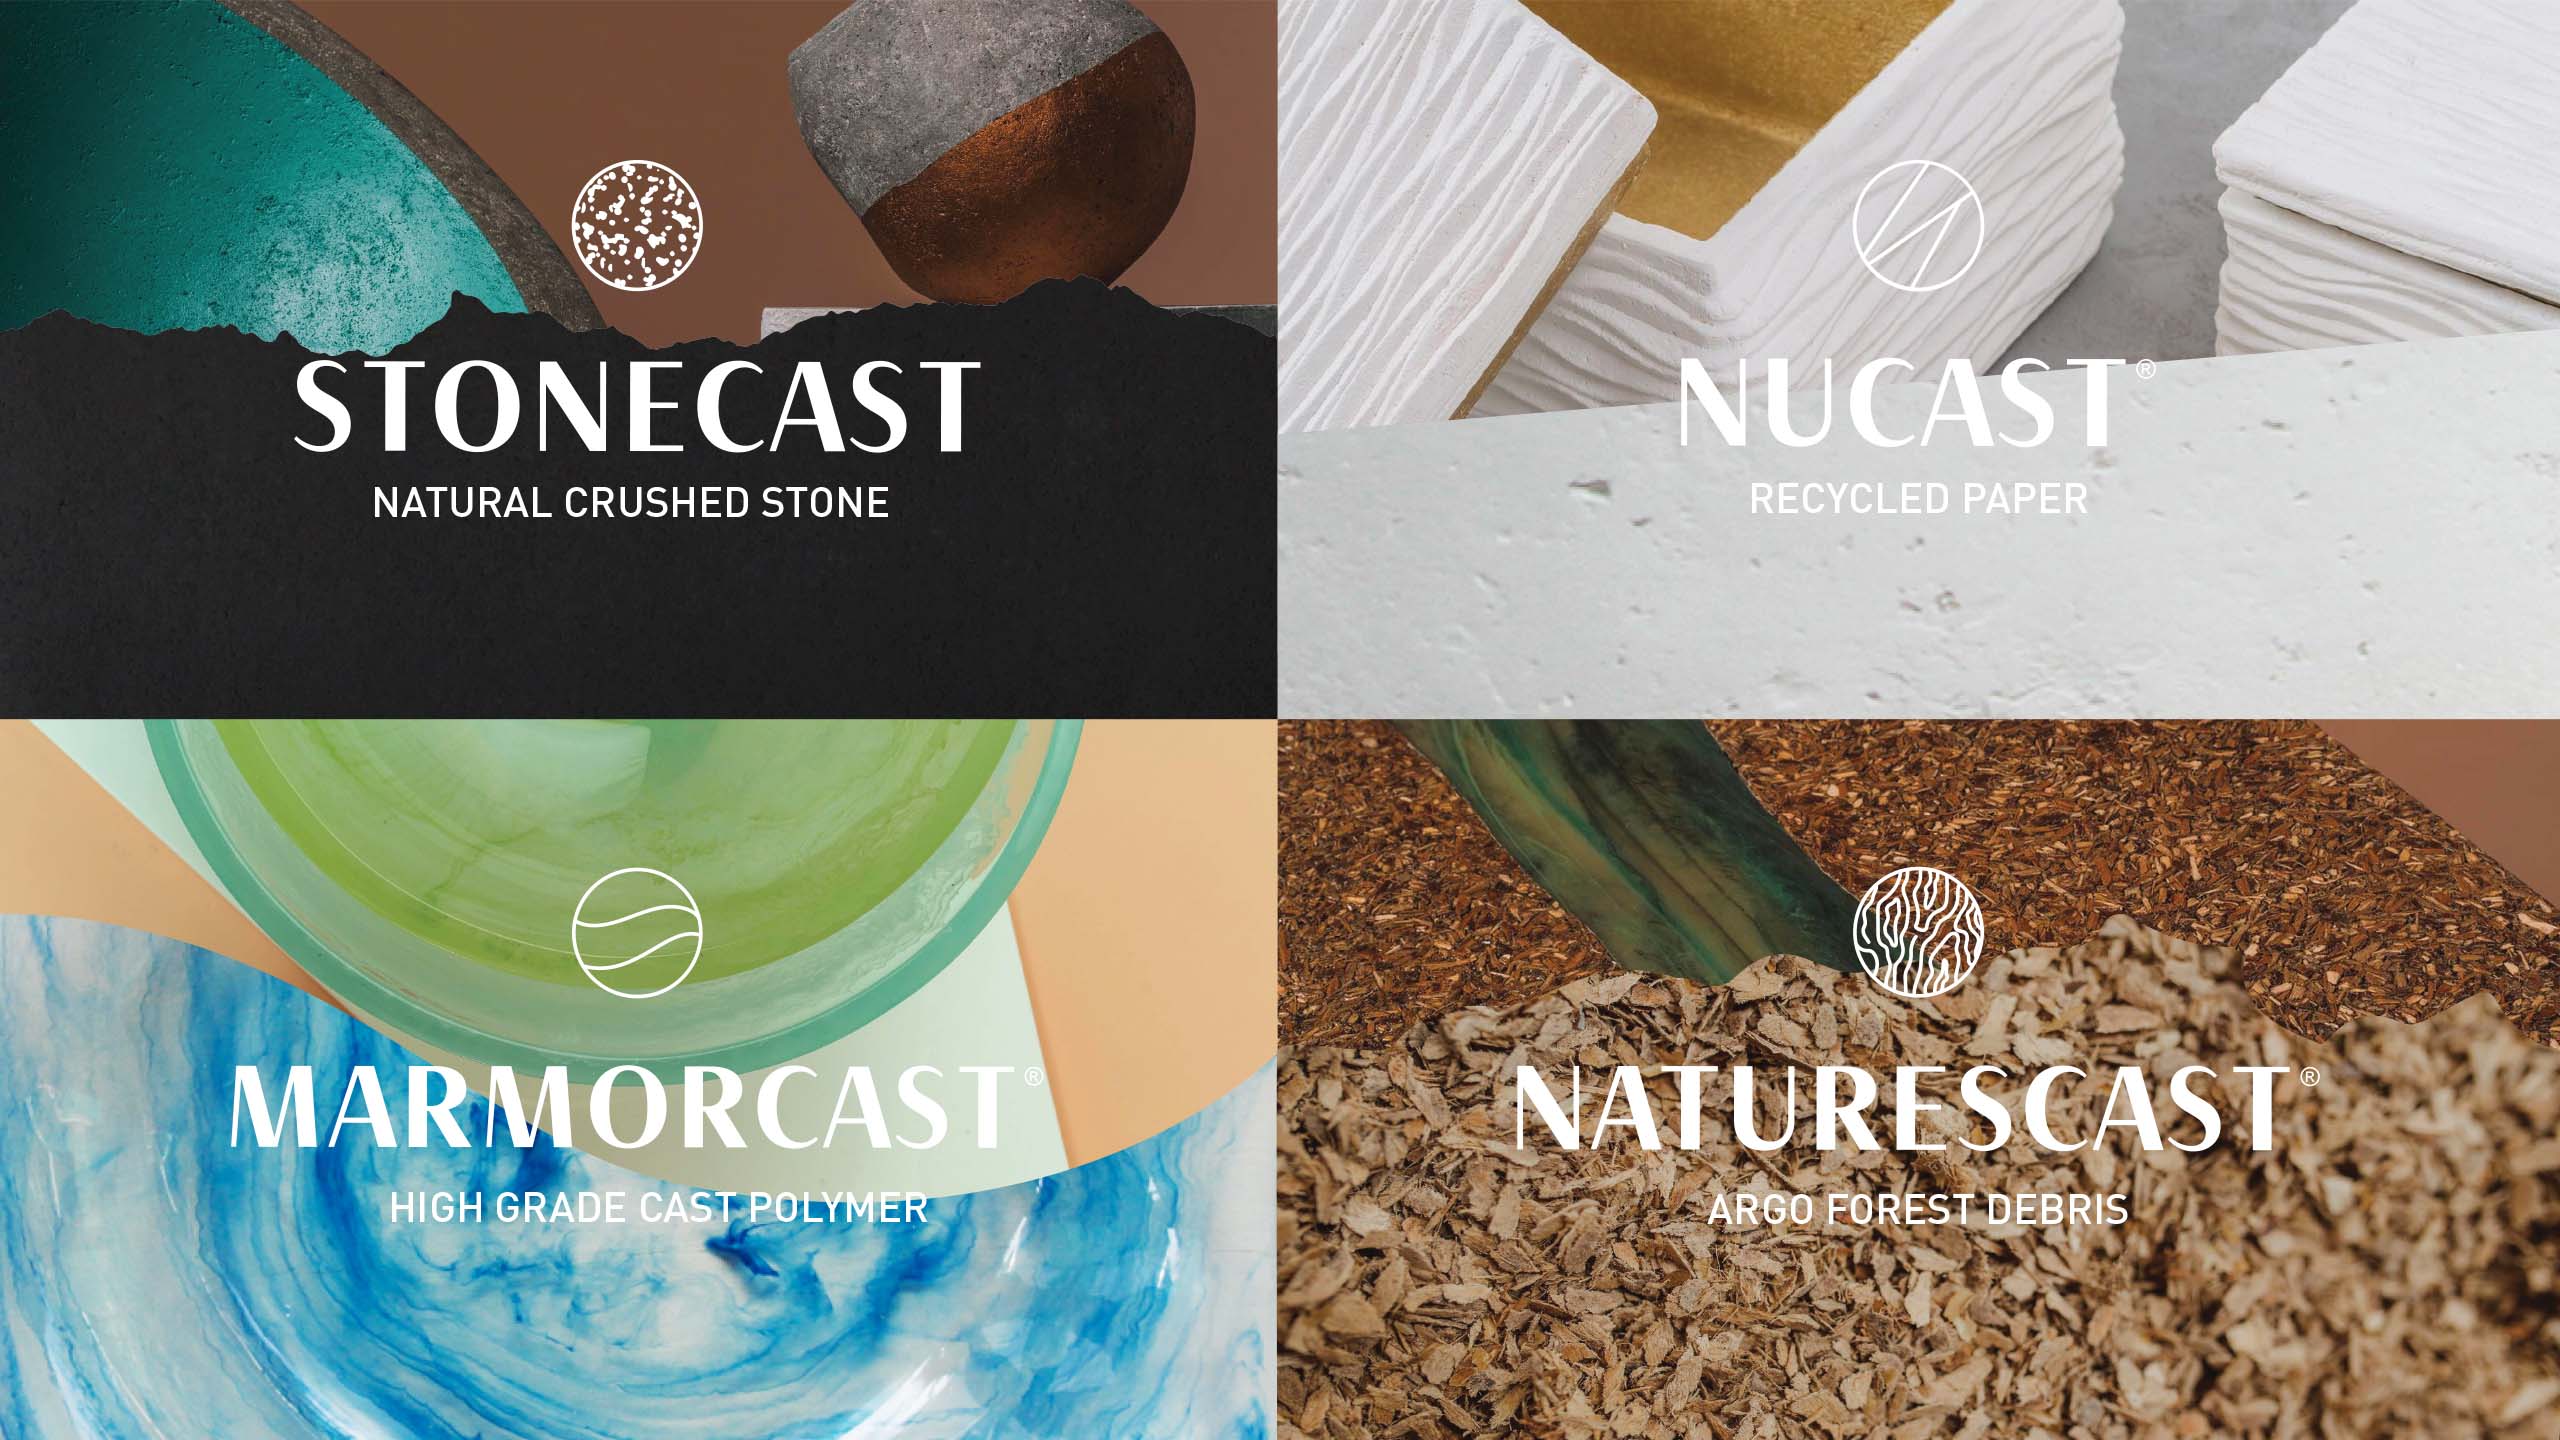 Product line logos, icons, and photos for home and furniture brand Nature's Legacy